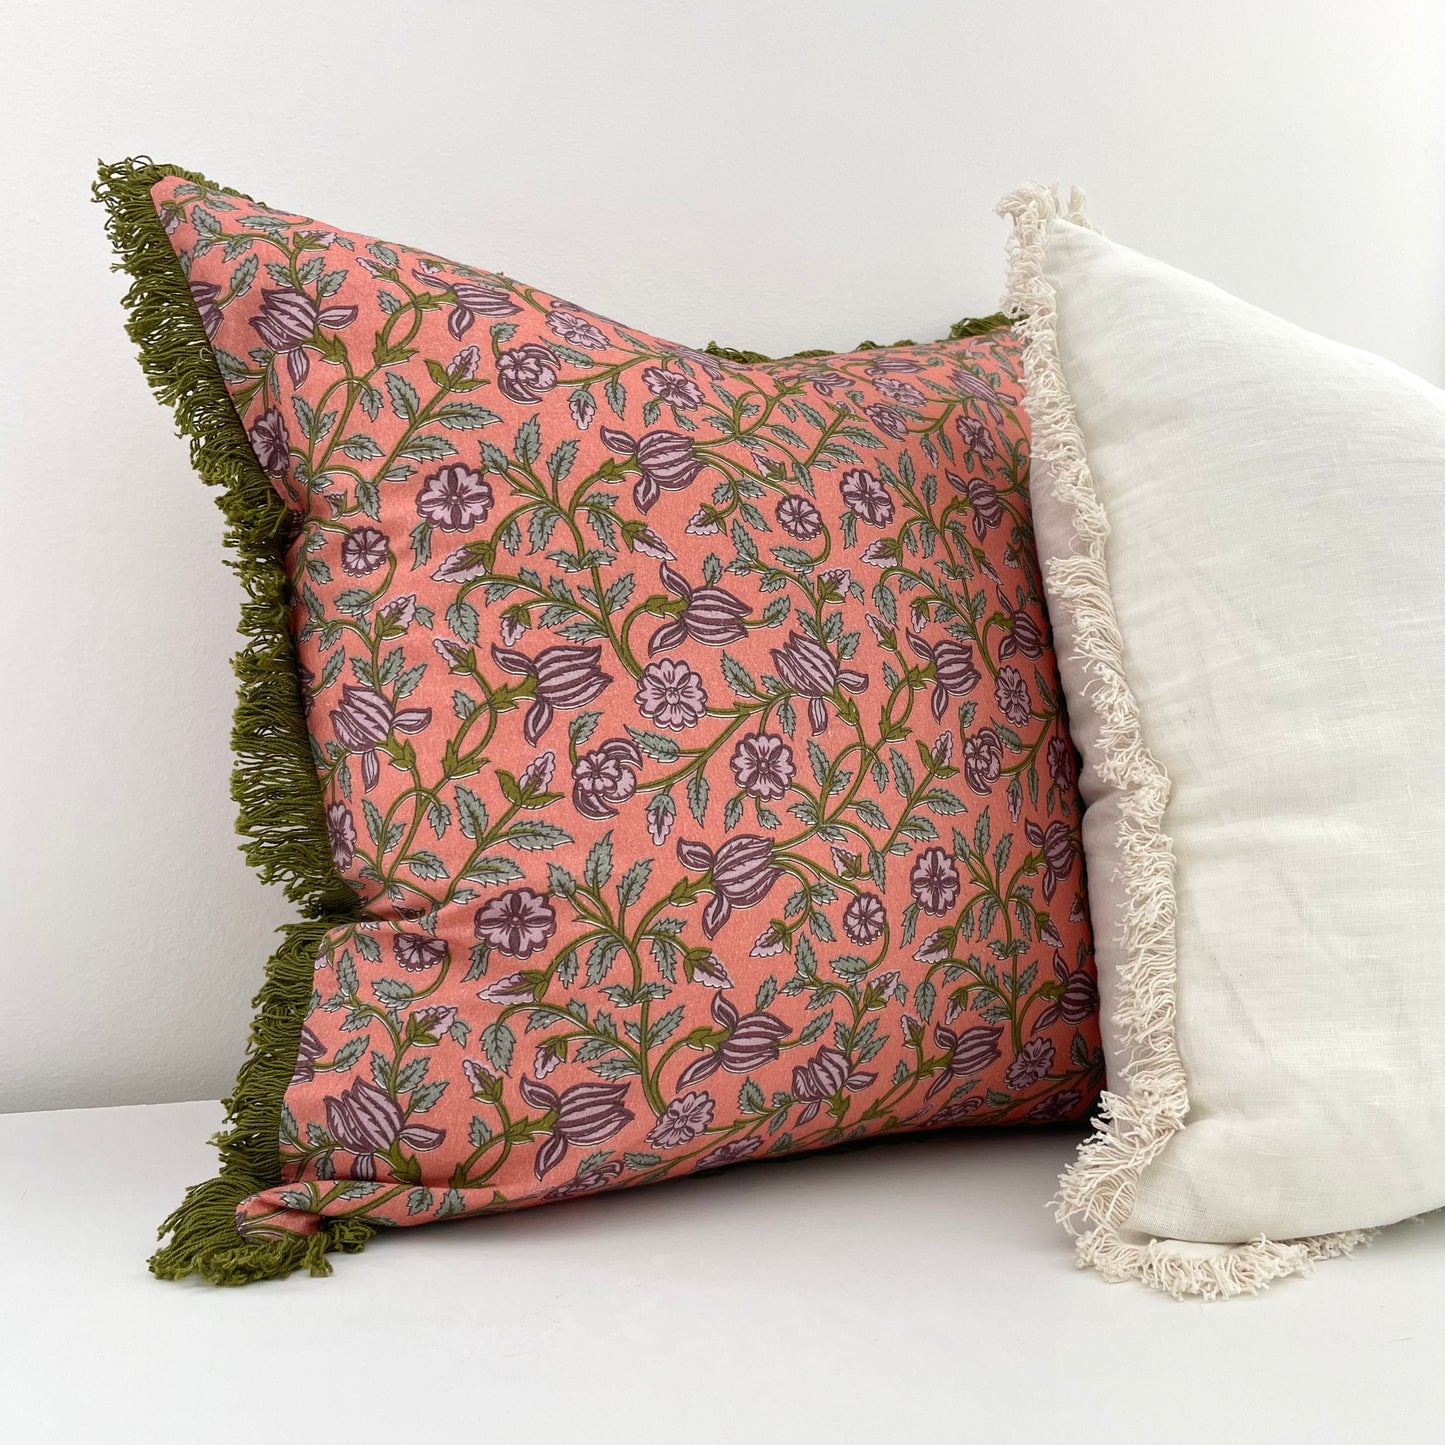 pink and green floral pillow cover with fringed edges and off white linen pillow cover